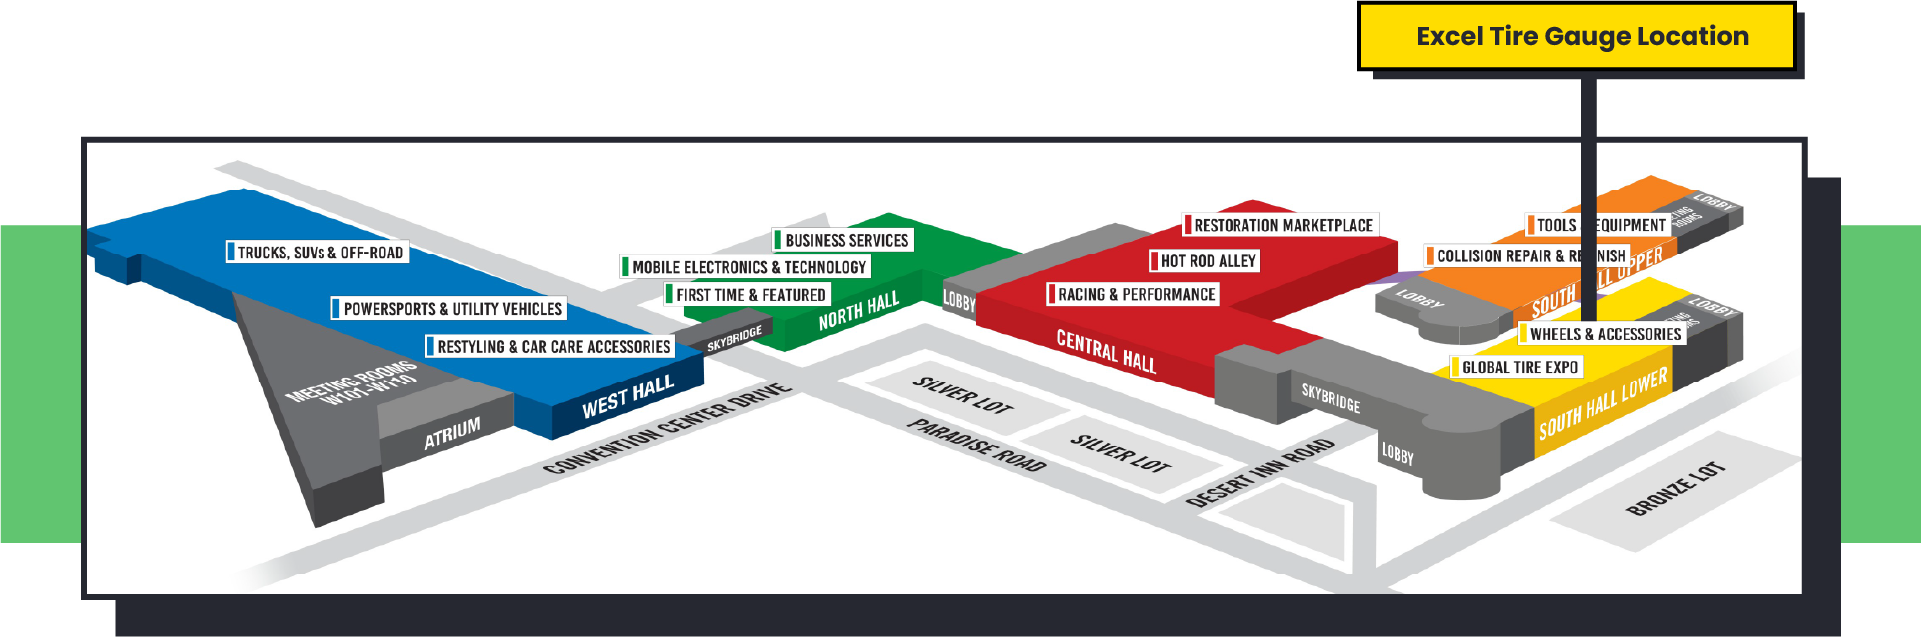 SEMA Floor Plan where Excel Tire Is Located